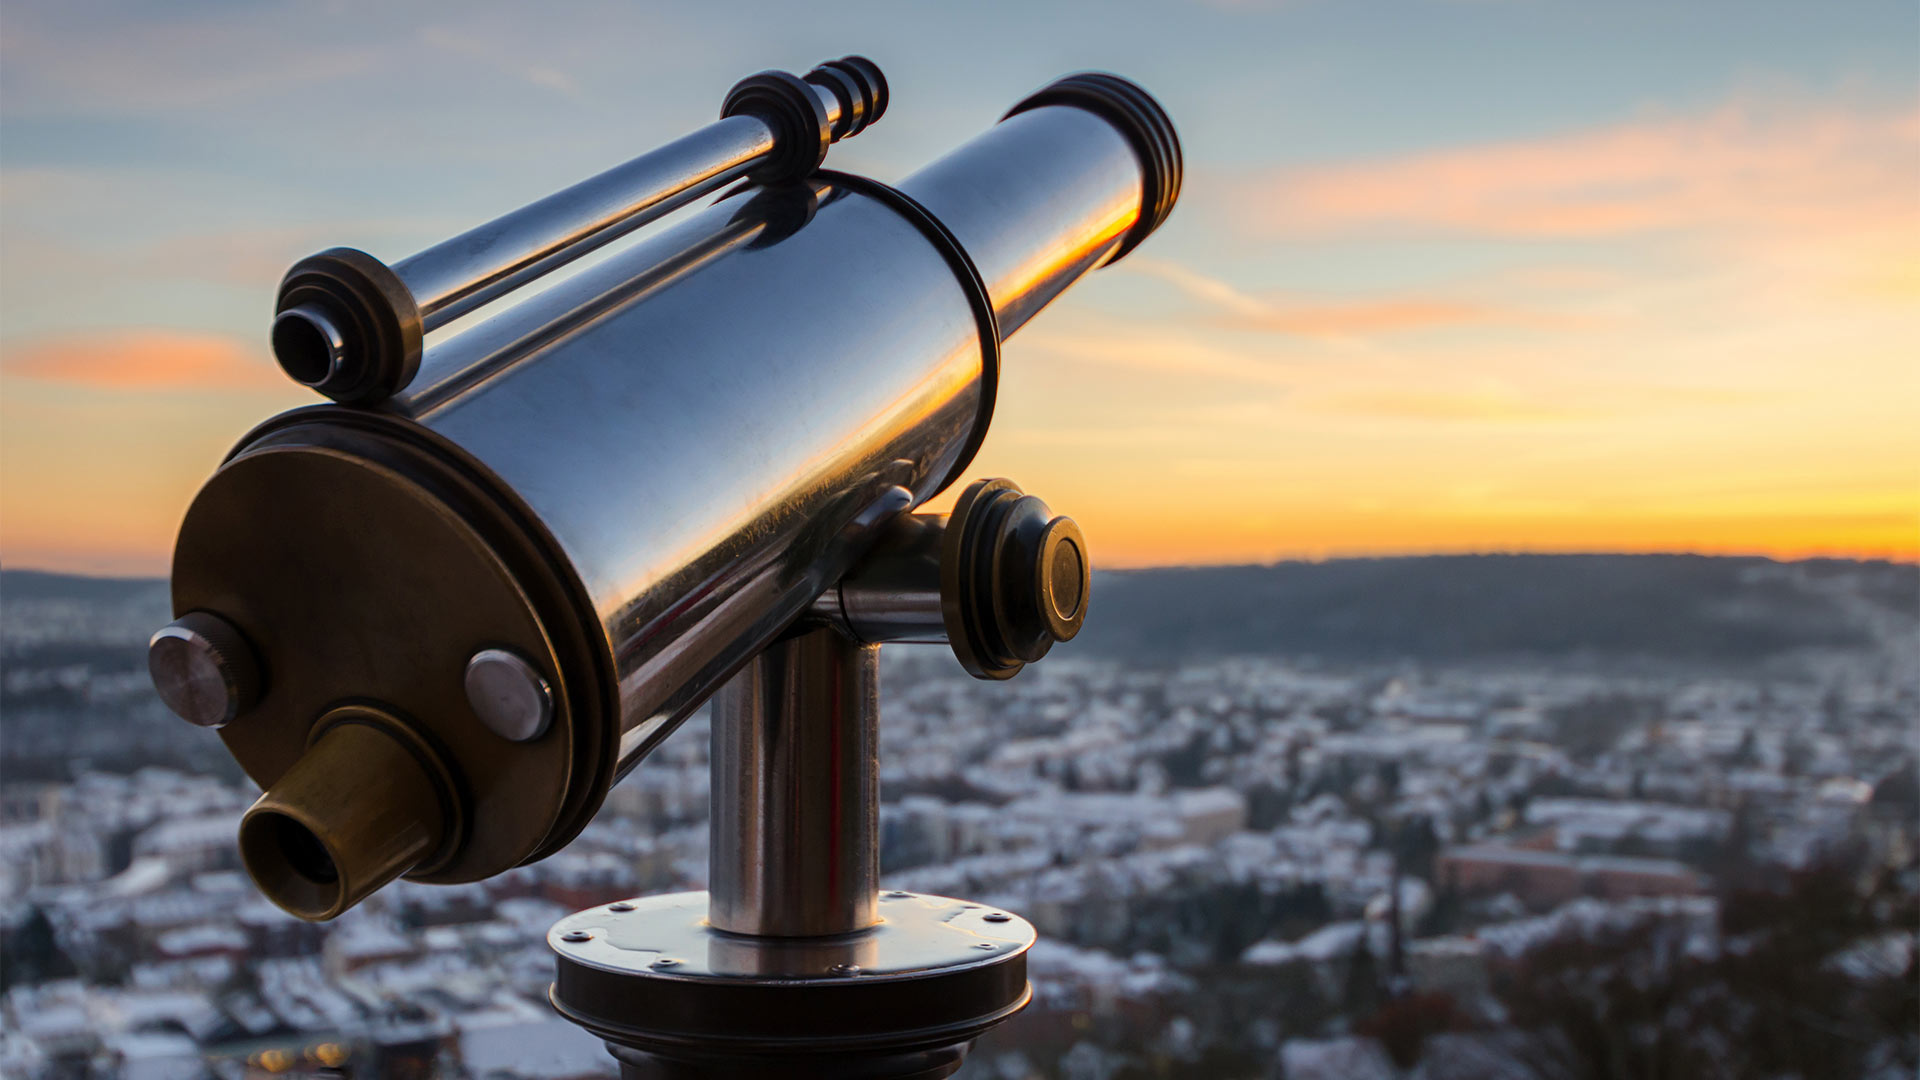 A monocular telescope looking over a town during sunset